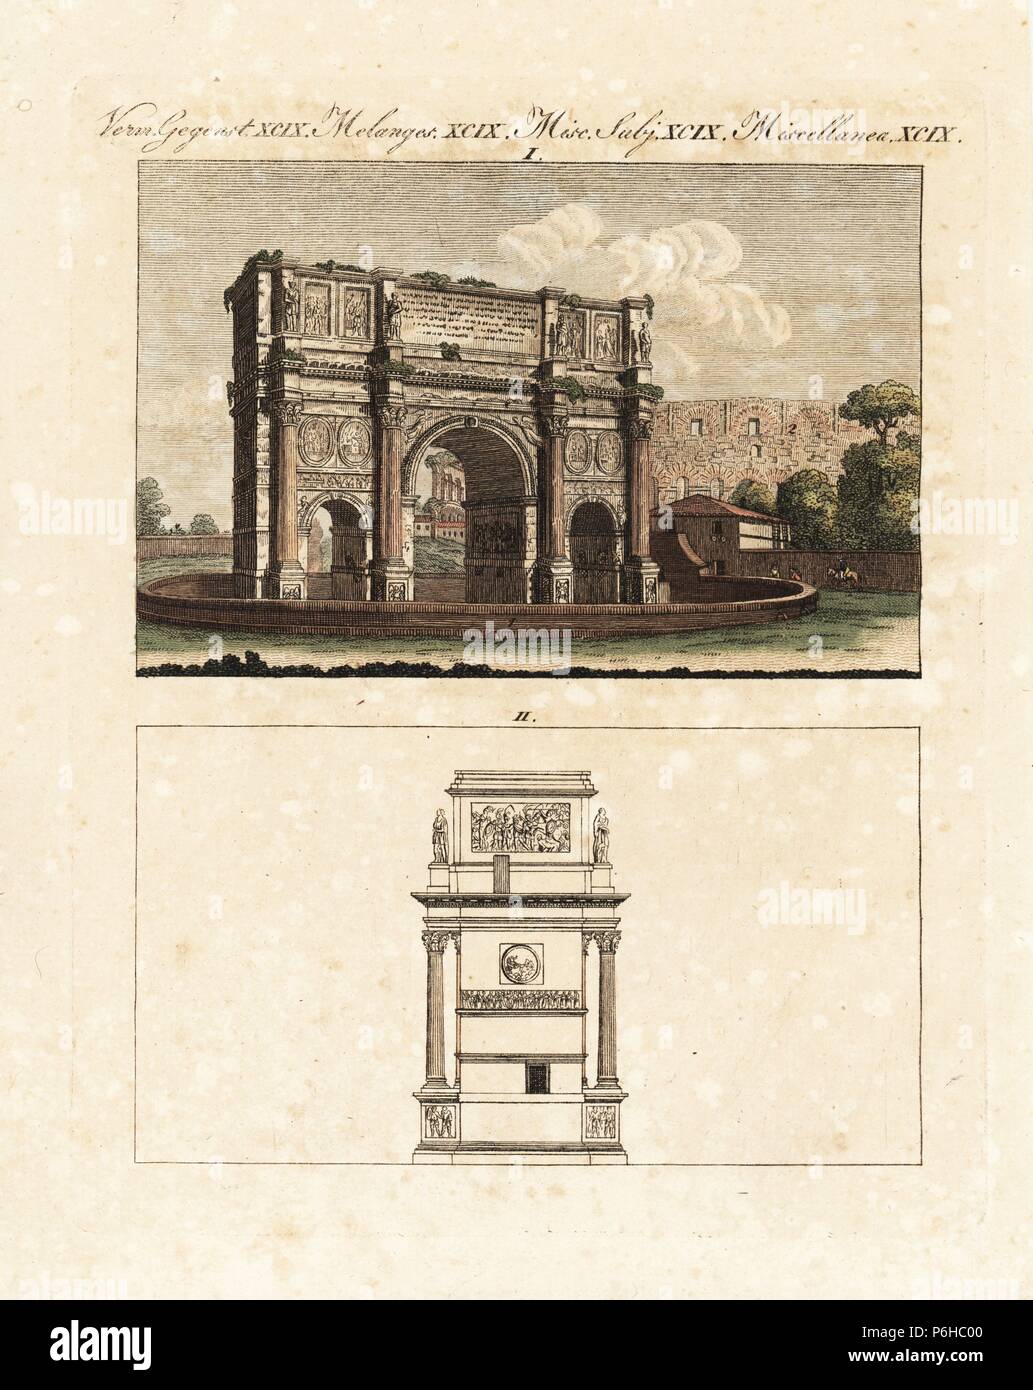 Arch of Constantine, triumphal arch in Rome. Built in 312 to commemorate his victory over Maxentius. Handcoloured copperplate engraving from Bertuch's 'Bilderbuch fur Kinder' (Picture Book for Children), Weimar, 1807. Friedrich Johann Bertuch (1747-1822) was a German publisher and man of arts most famous for his 12-volume encyclopedia for children illustrated with 1,200 engraved plates on natural history, science, costume, mythology, etc., published from 1790-1830. Stock Photo